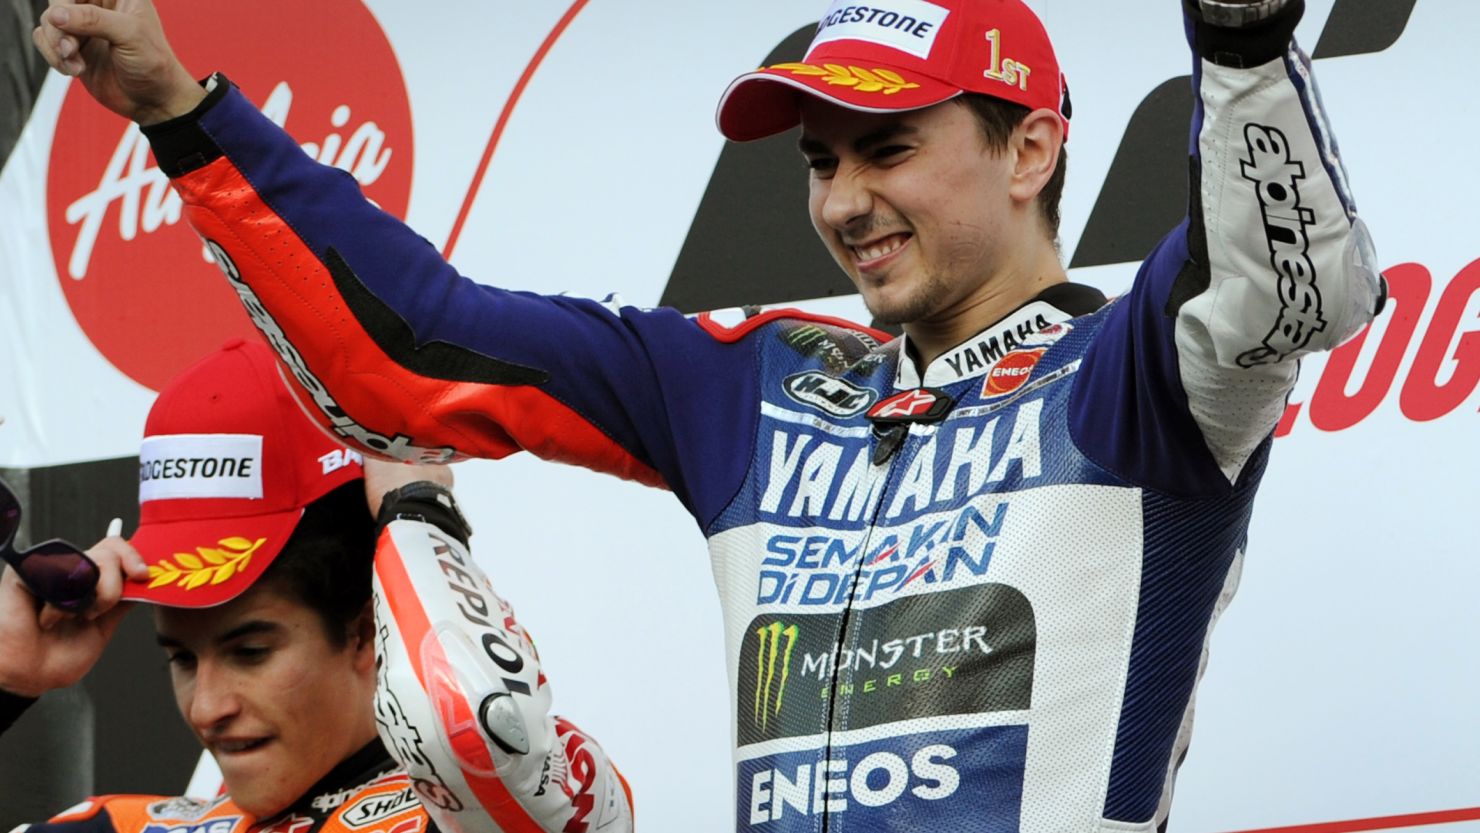 Jorge Lorenzo takes the plaudits at the Japan MotoGP ahead of second placed Marc Marquez.